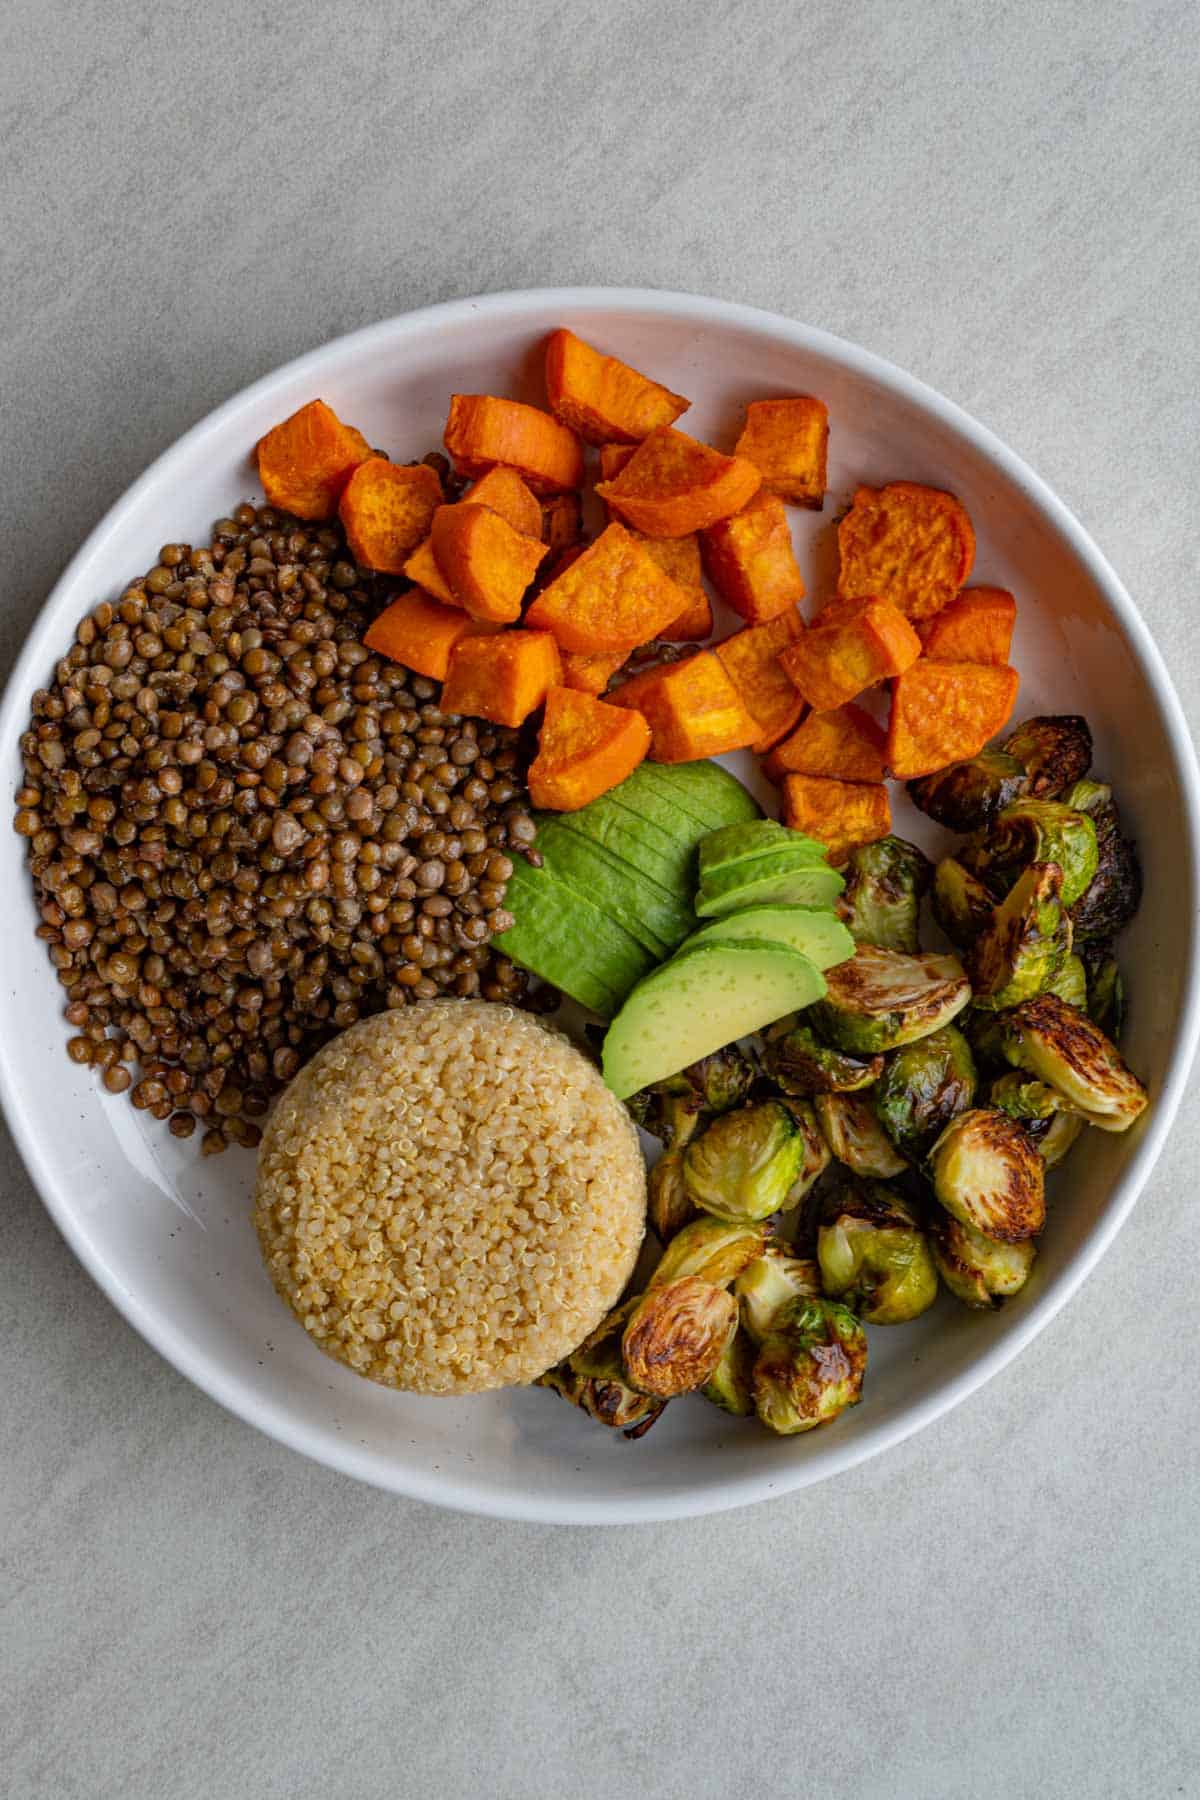 Roasted lentils, sweet potato, and Brussels sprouts, sliced avocado, and cooked quinoa in a white bowl.